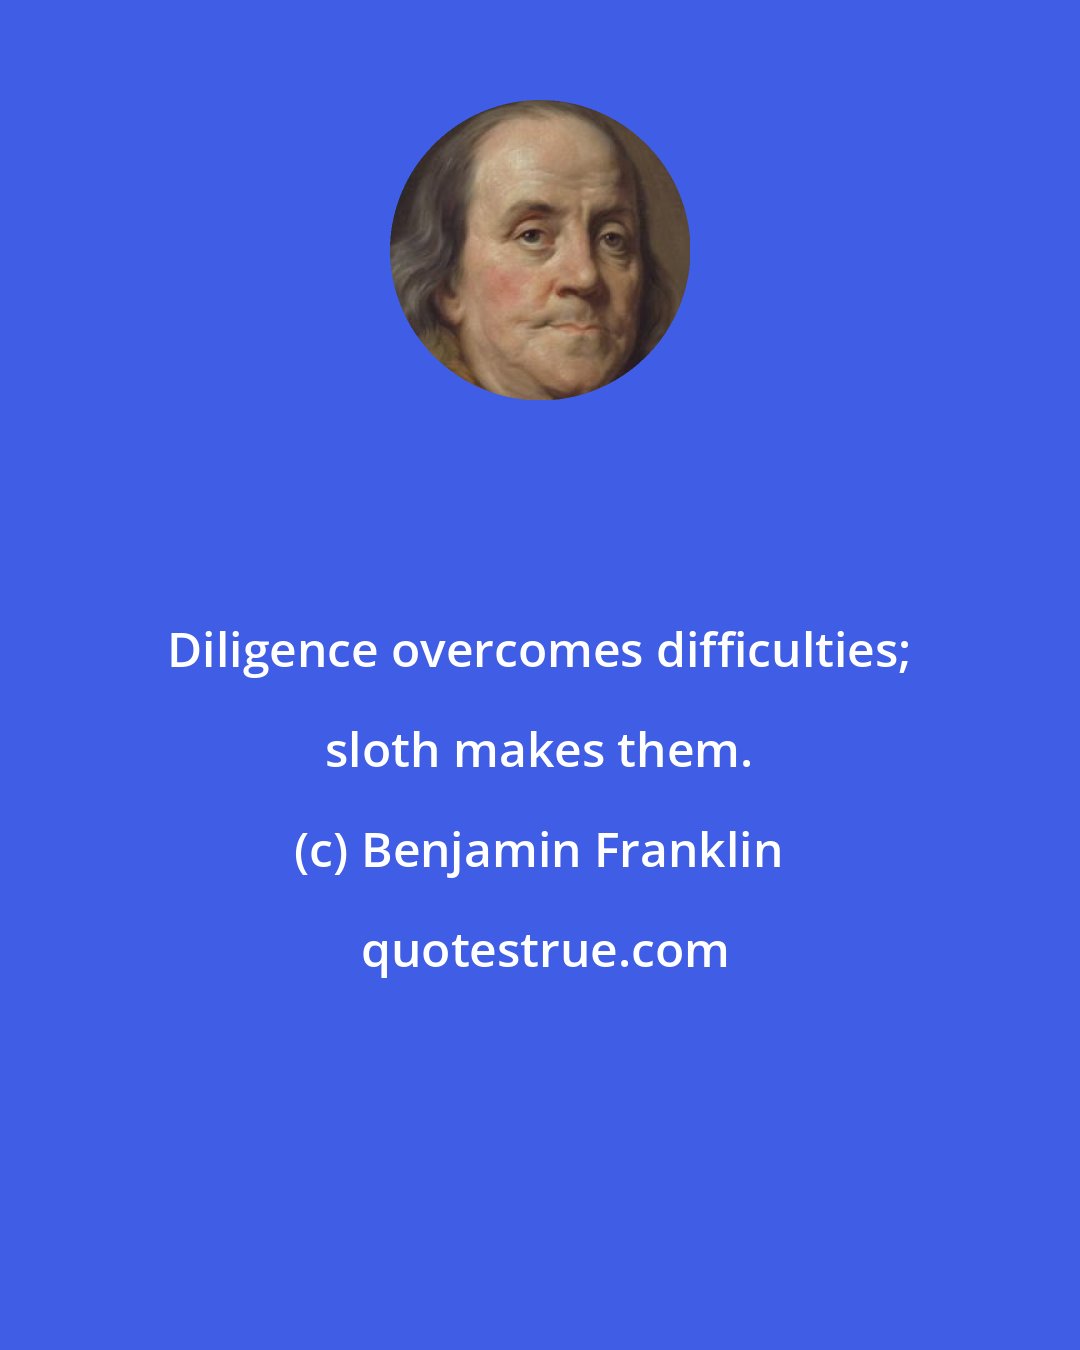 Benjamin Franklin: Diligence overcomes difficulties; sloth makes them.